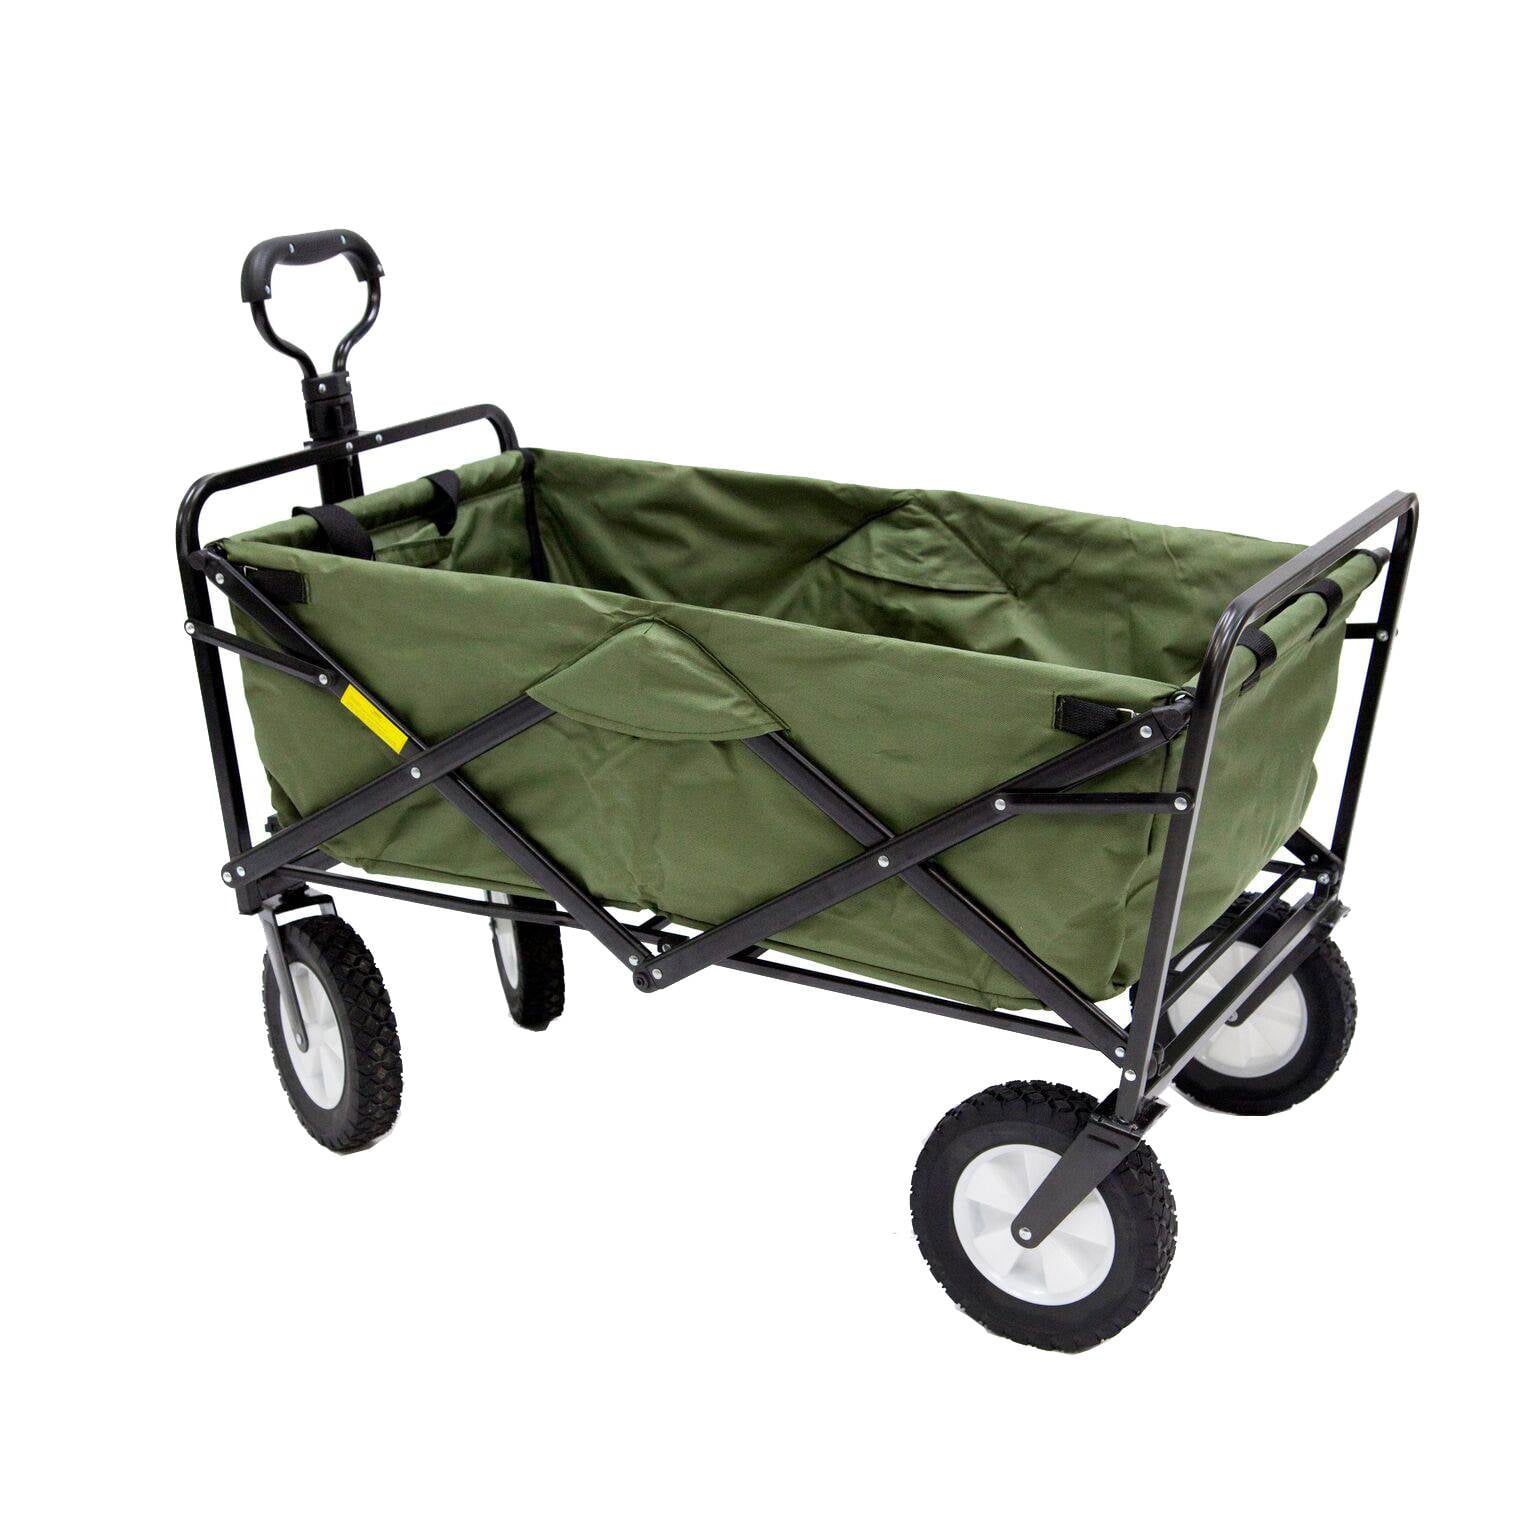 Mac Sports WTC-145 Collapsible Outdoor Folding Wagon Black Certified Refurbished 